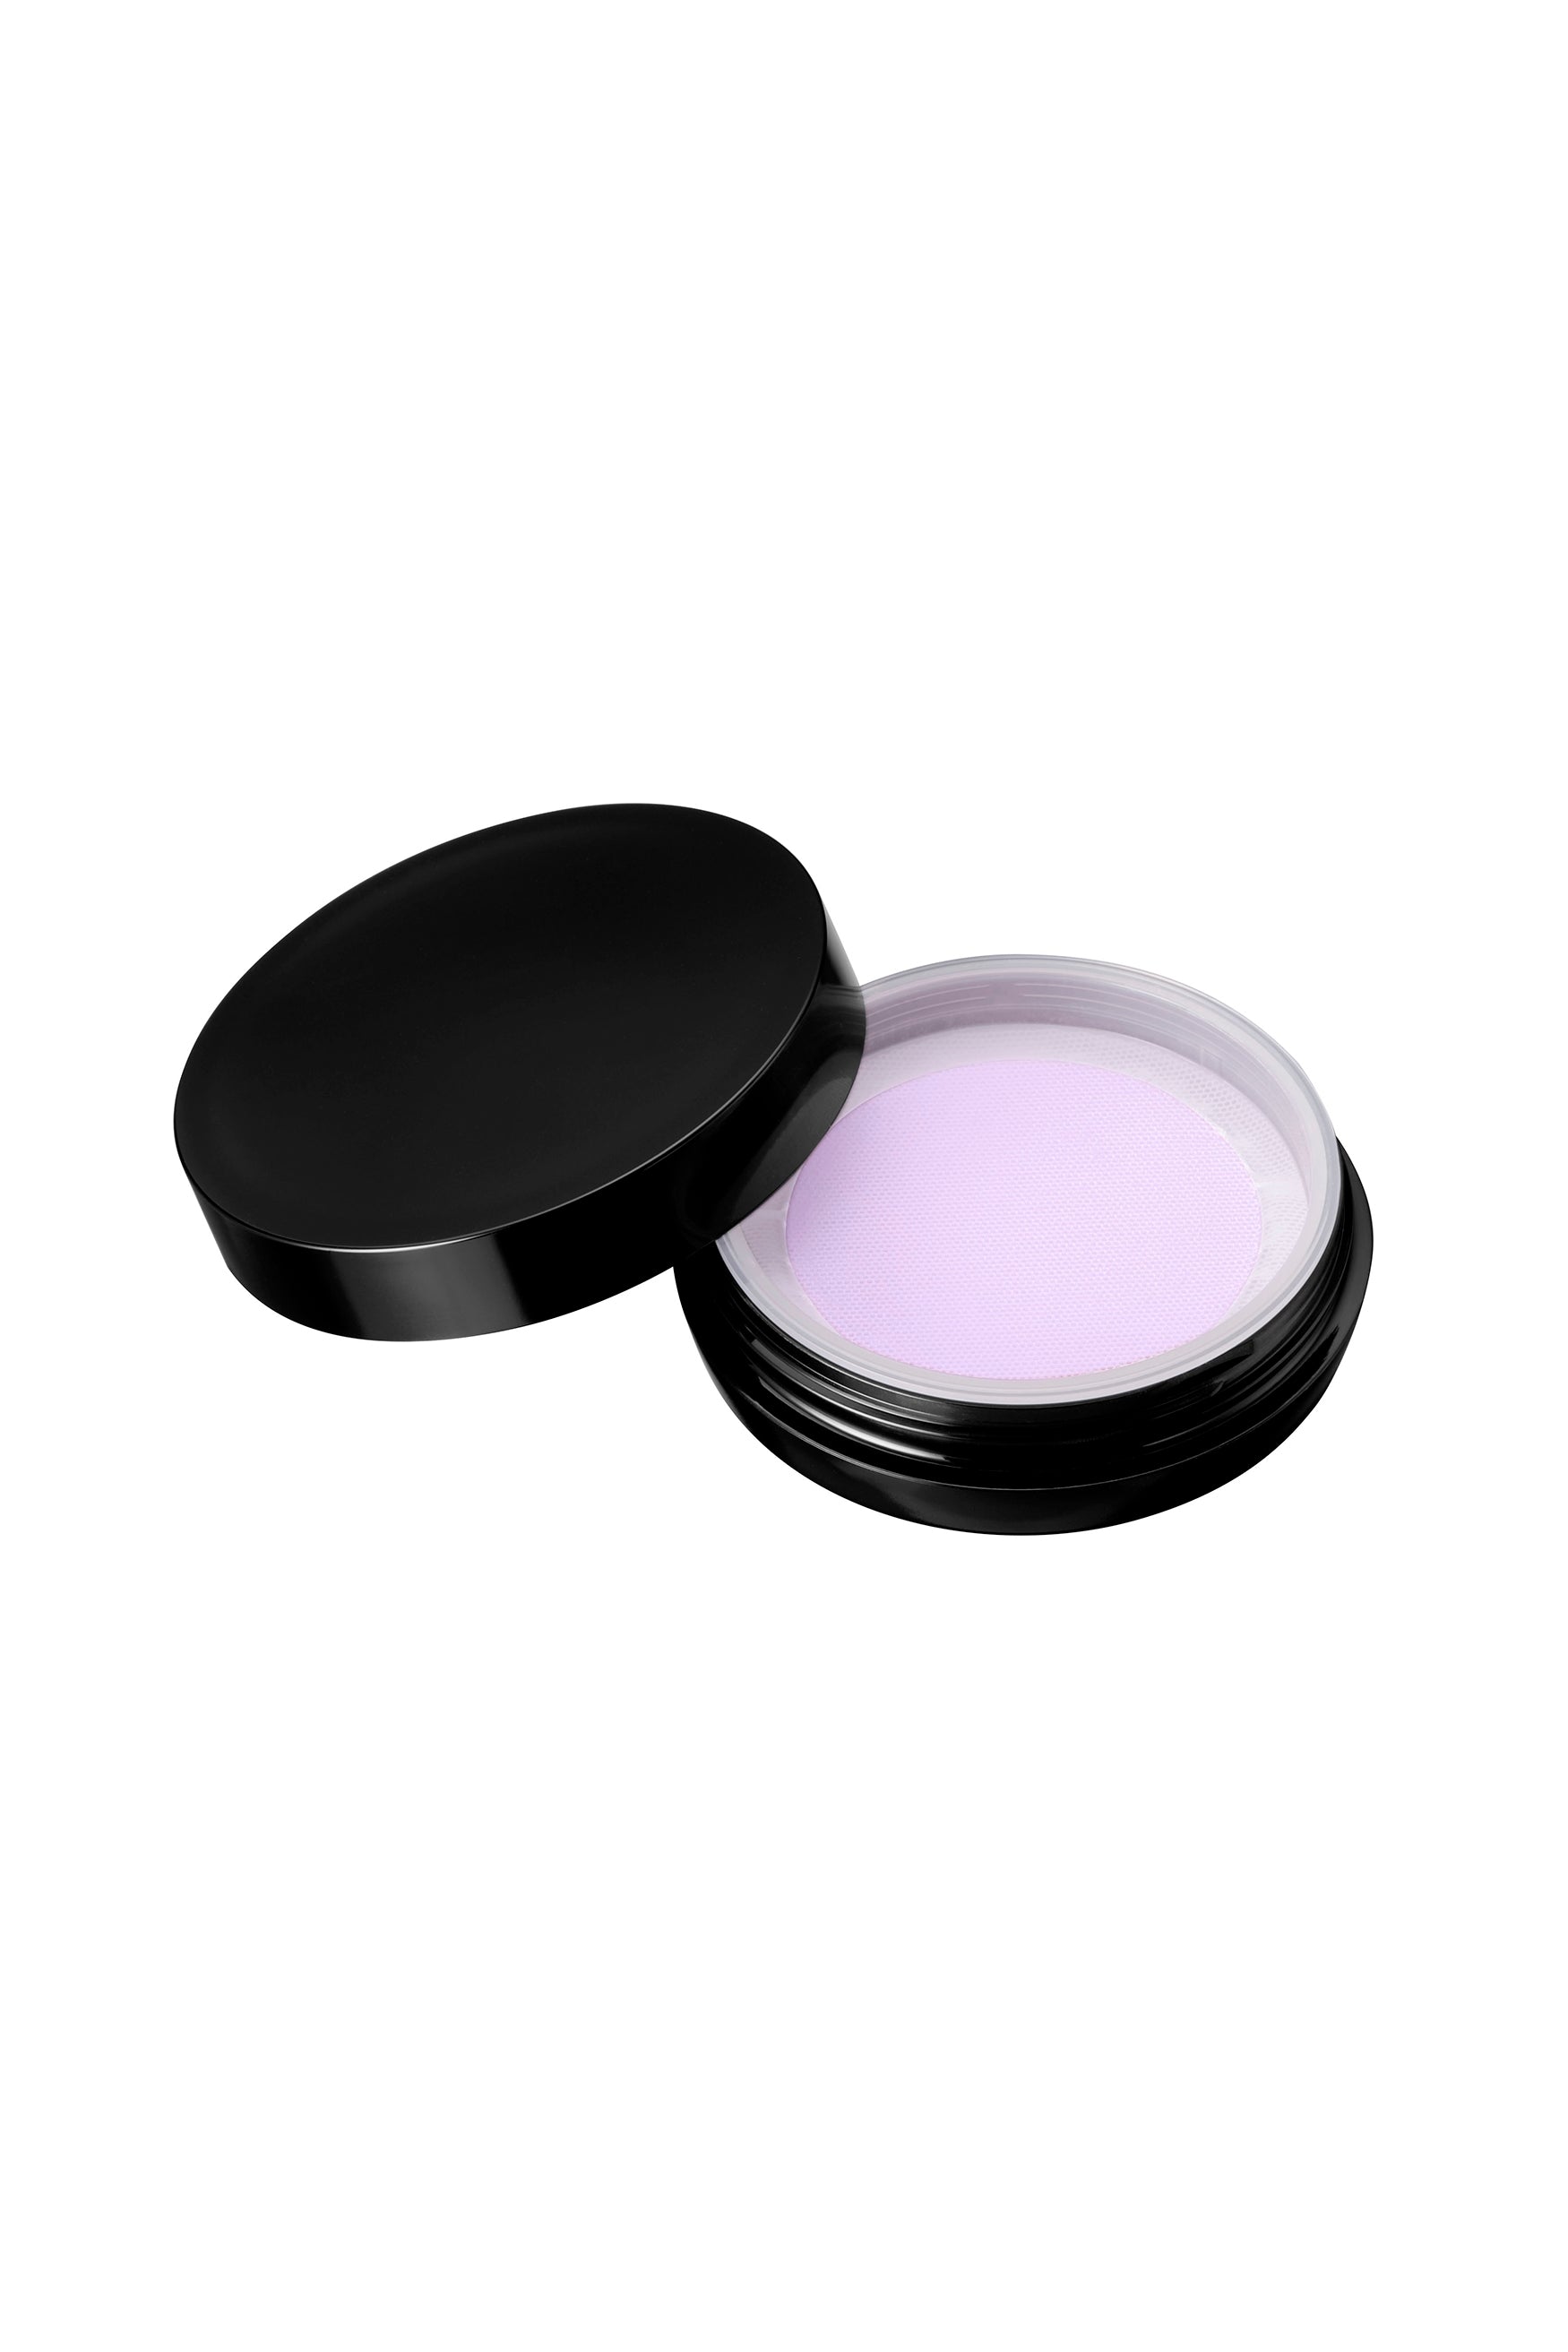 The mini refill is in a small round black box, includes a generous amount of rich formula for a flawless complexion